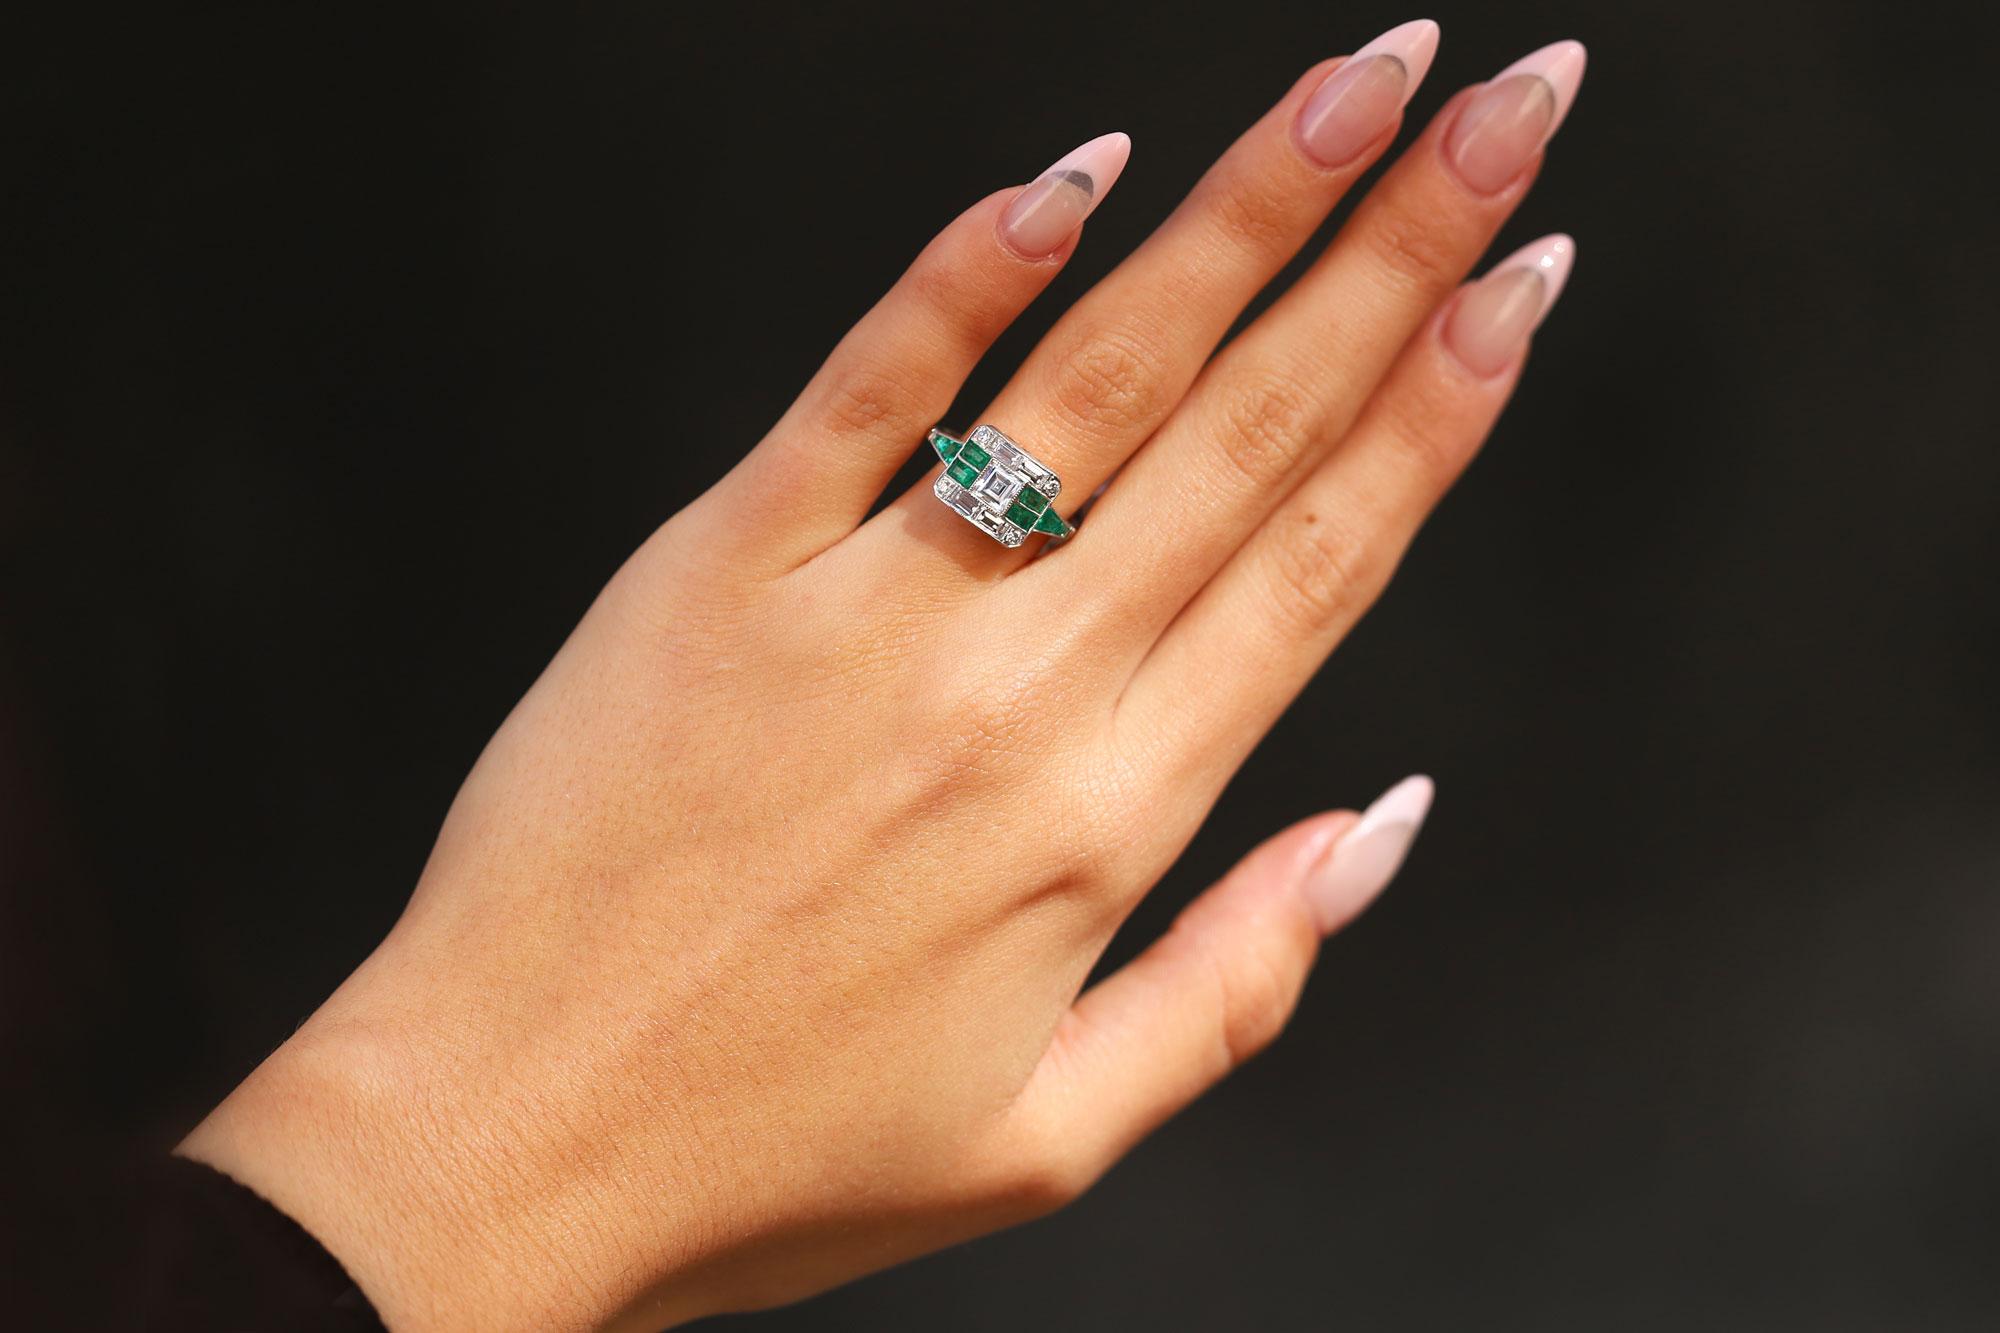 A unique engagement ring with a sleek design paying homage to the 1920s Art Deco Gatsby era, this platinum masterpiece is hand crafted around a vintage 1/2 carat carrè cut diamond. Laced with lush, green Colombian emeralds and diamonds precisely set